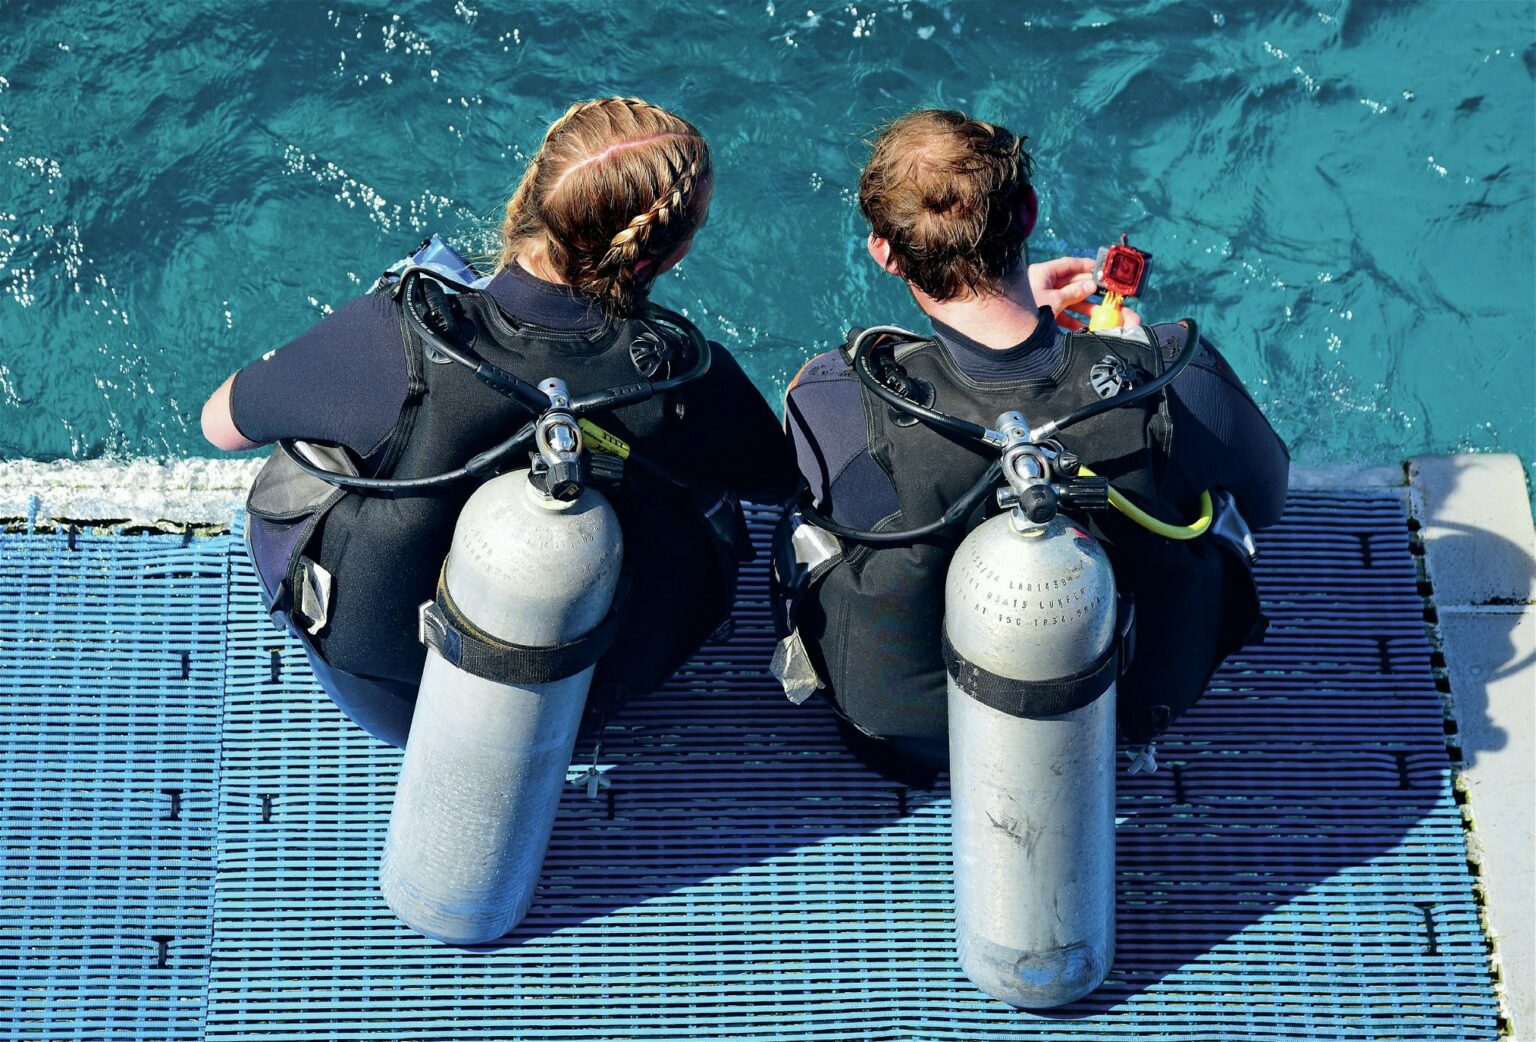 Divers before dive